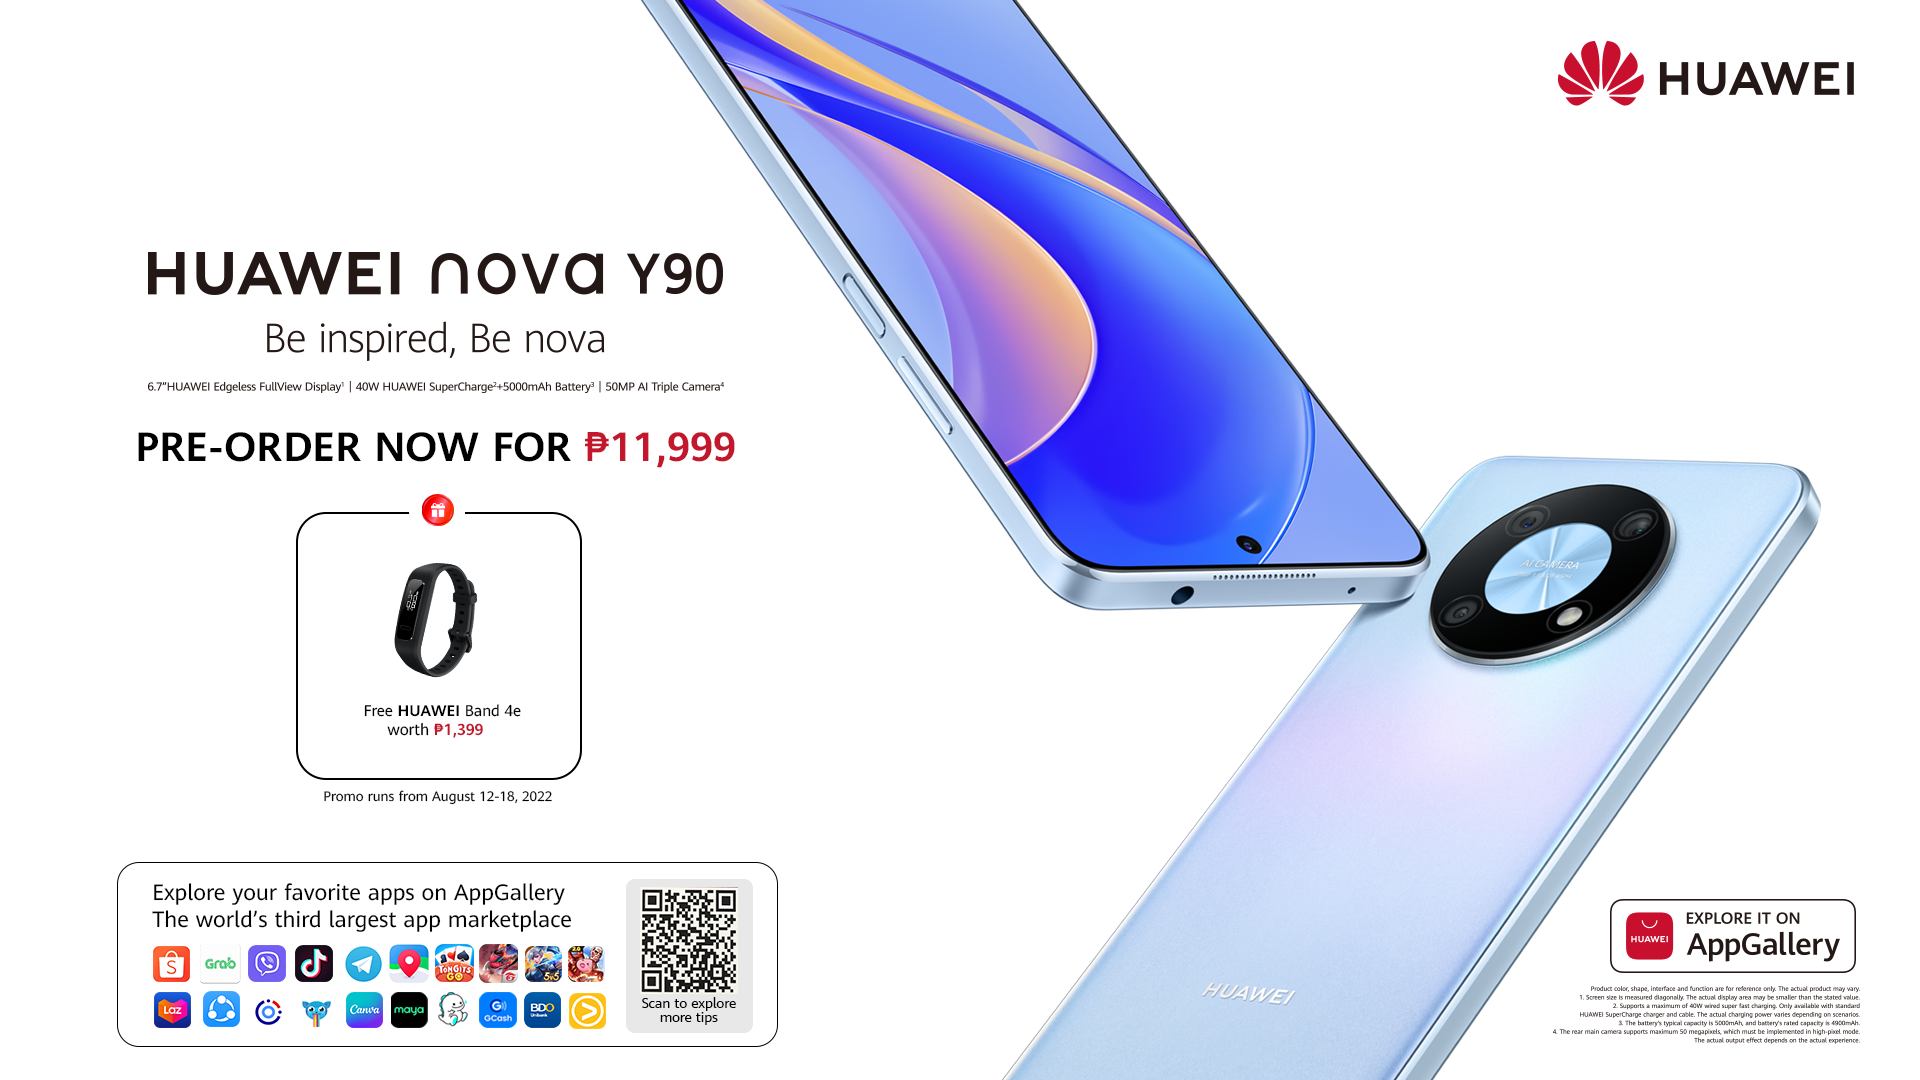 Huawei Announces Price, Pre-order of nova Y90 in the Philippin